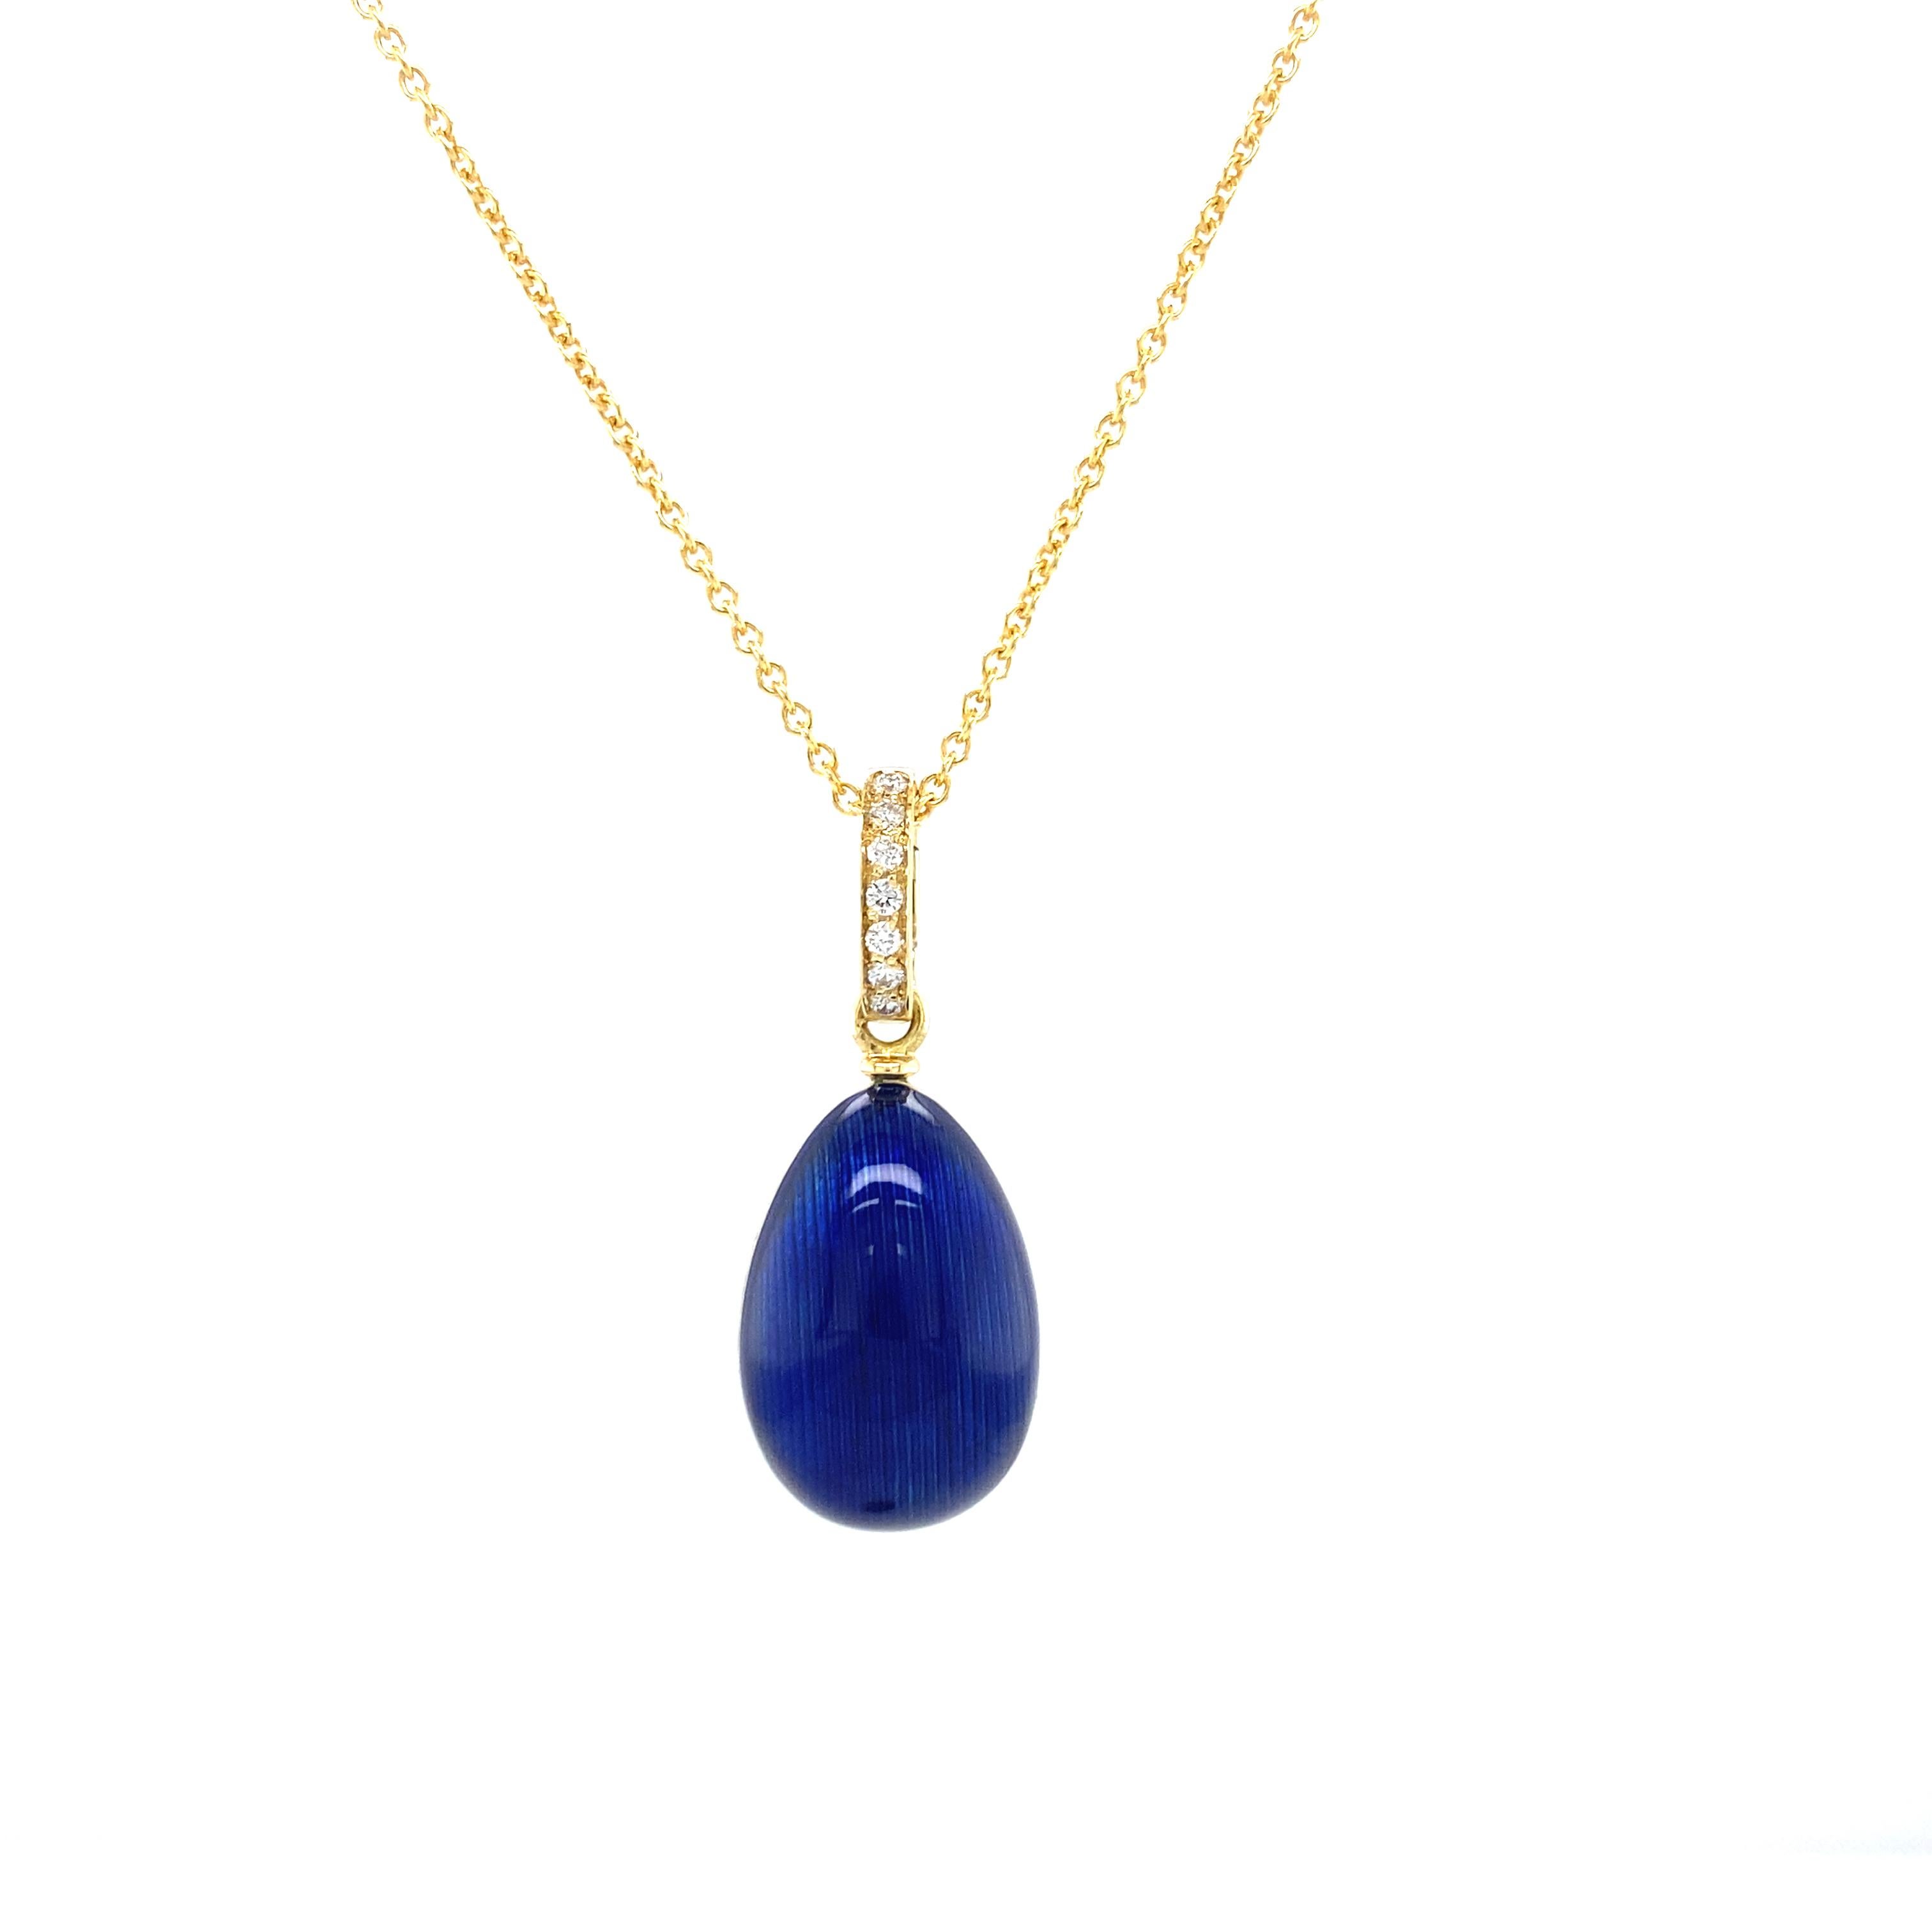 Victor Mayer egg shaped pendant necklace, easter egg collection, 18k yellow gold, electric blue vitreous enamel, 7 diamonds total 0,16ct G/VS1

About the creator Victor Mayer
Victor Mayer is internationally renowned for elegant timeless designs and